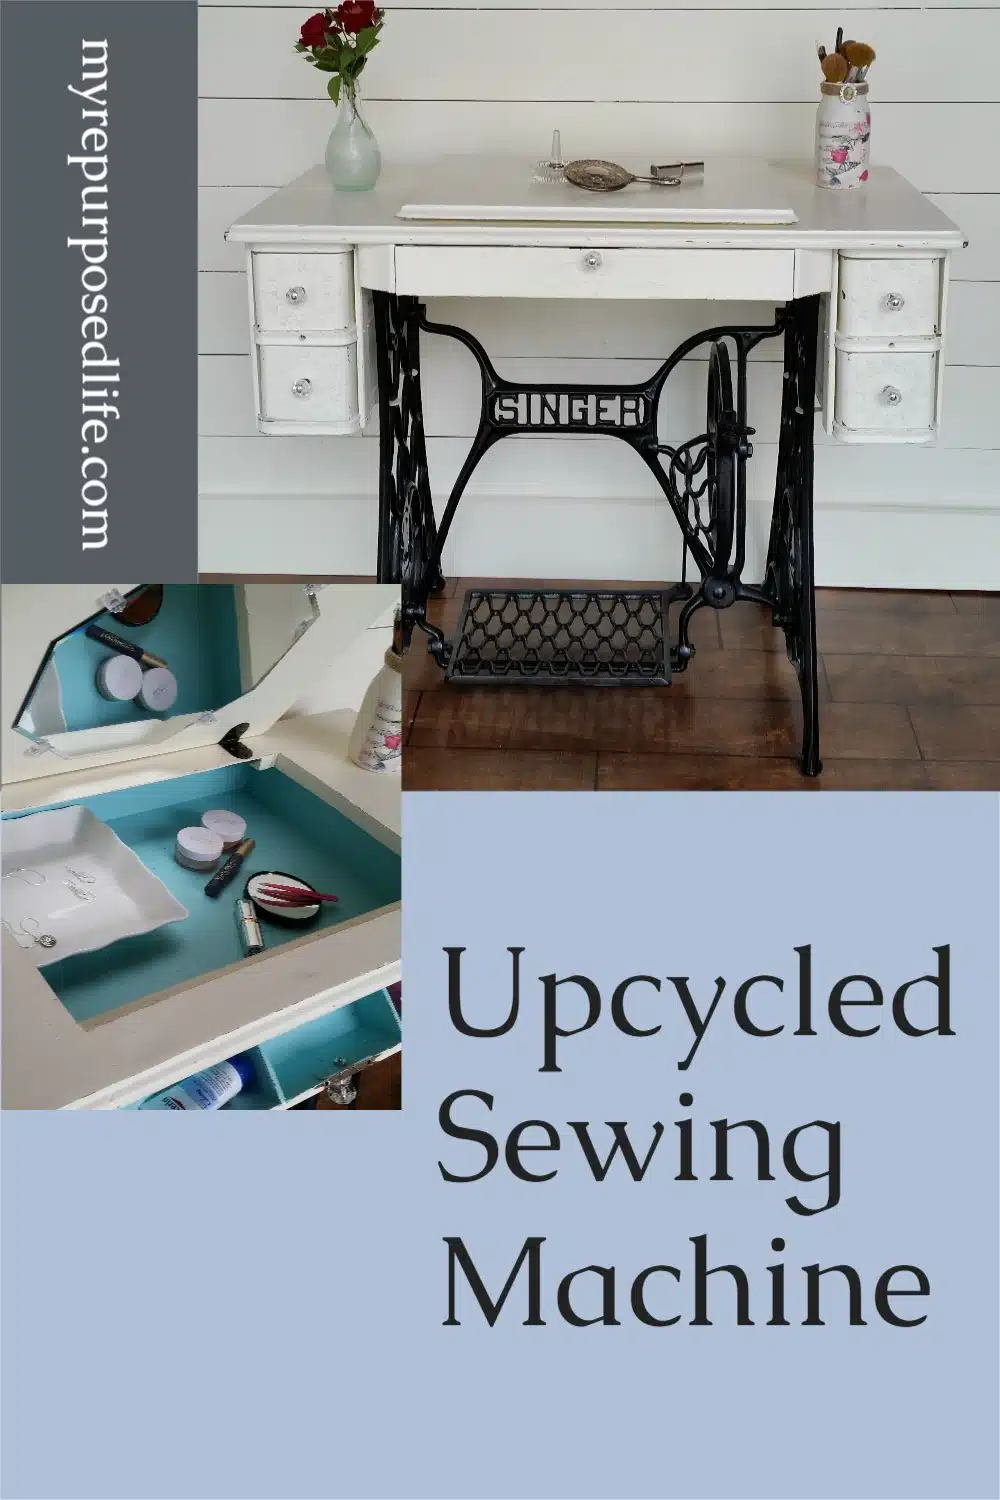 How to repurpose a singer sewing machine into a desk, table or makeup vanity. Lots of storage, very versatile piece of furniture for your home. #MyRepurposedLife #repurposed #furniture #singer #sewingmachine #makeover #upcycle via @repurposedlife